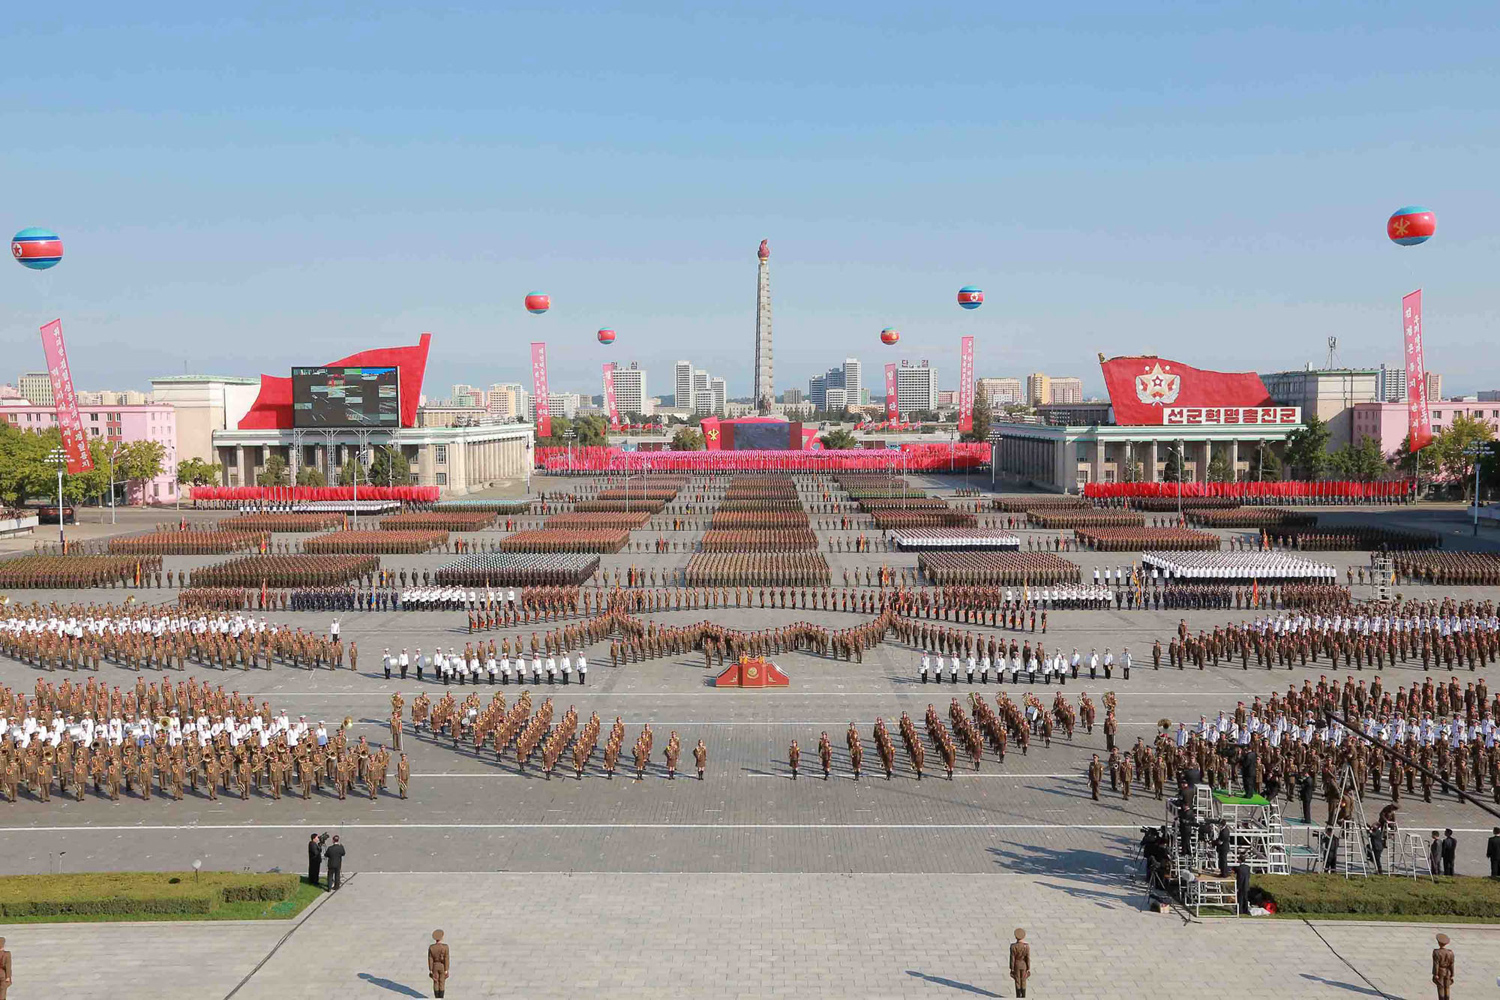 North Korea Marks 70 Years of Workers’ Party Rule 13